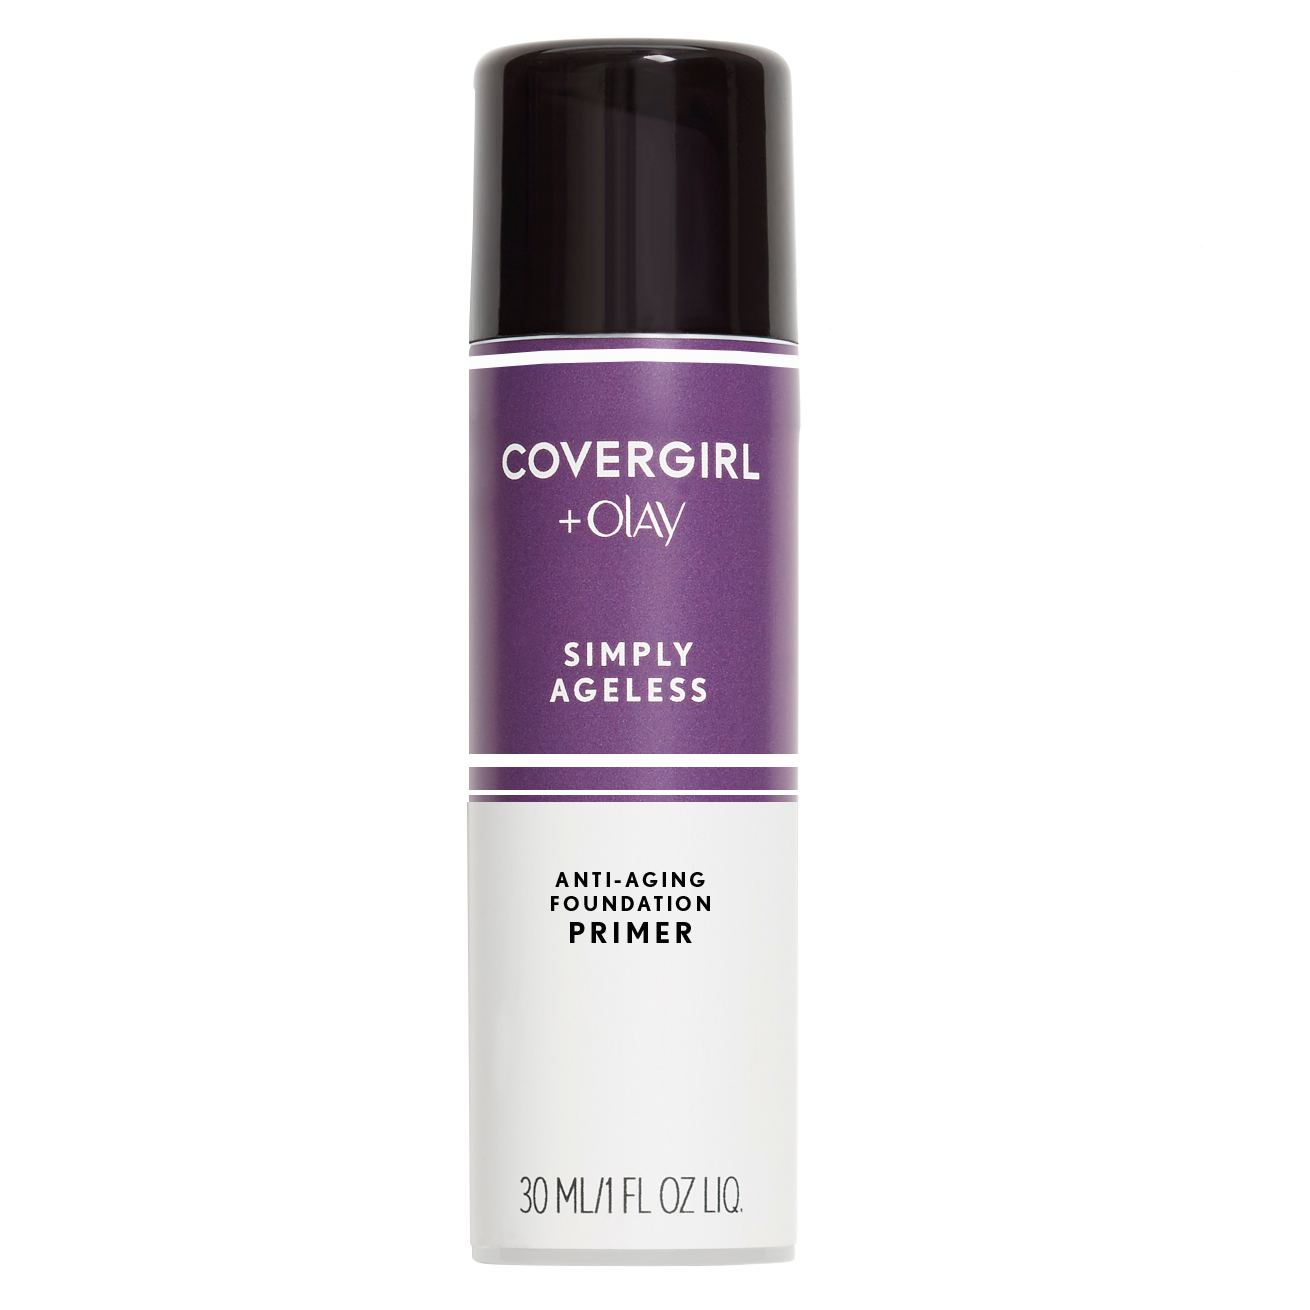 COVERGIRL + Olay Simply Ageless Anti-Aging Primer, 1 Fl Oz, Hydrating Primer, Anti-Aging Primer, Cruelty Free Primer, Reduces Wrinkles, Improves Skin Tone - image 4 of 9